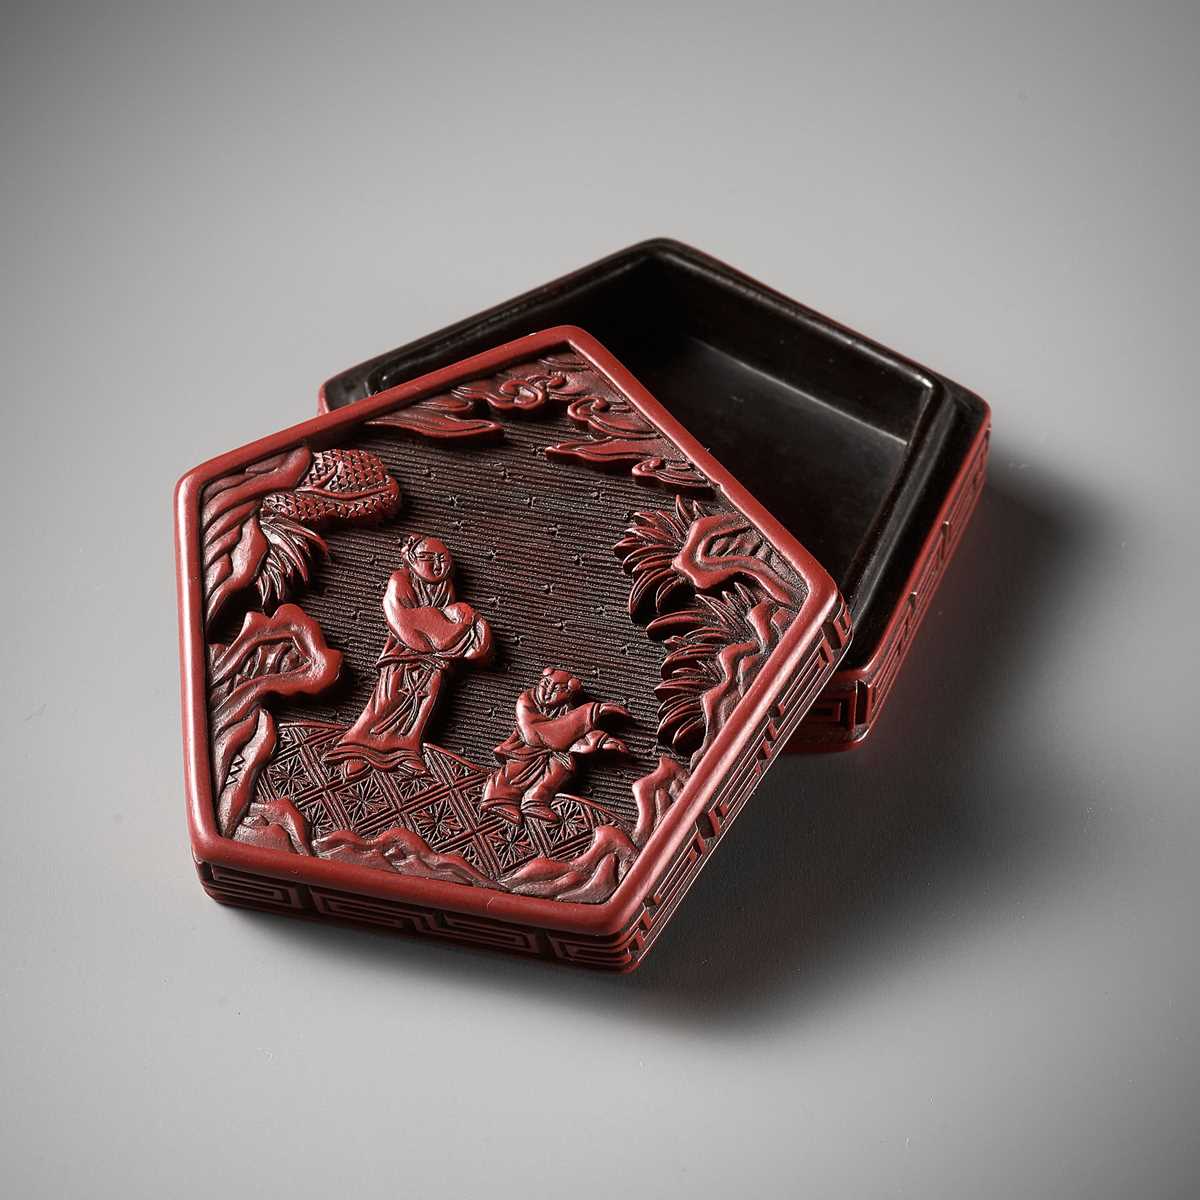 Lot 8 - A SMALL CINNABAR LACQUER BOX AND COVER, YUAN TO MID-MING DYNASTY